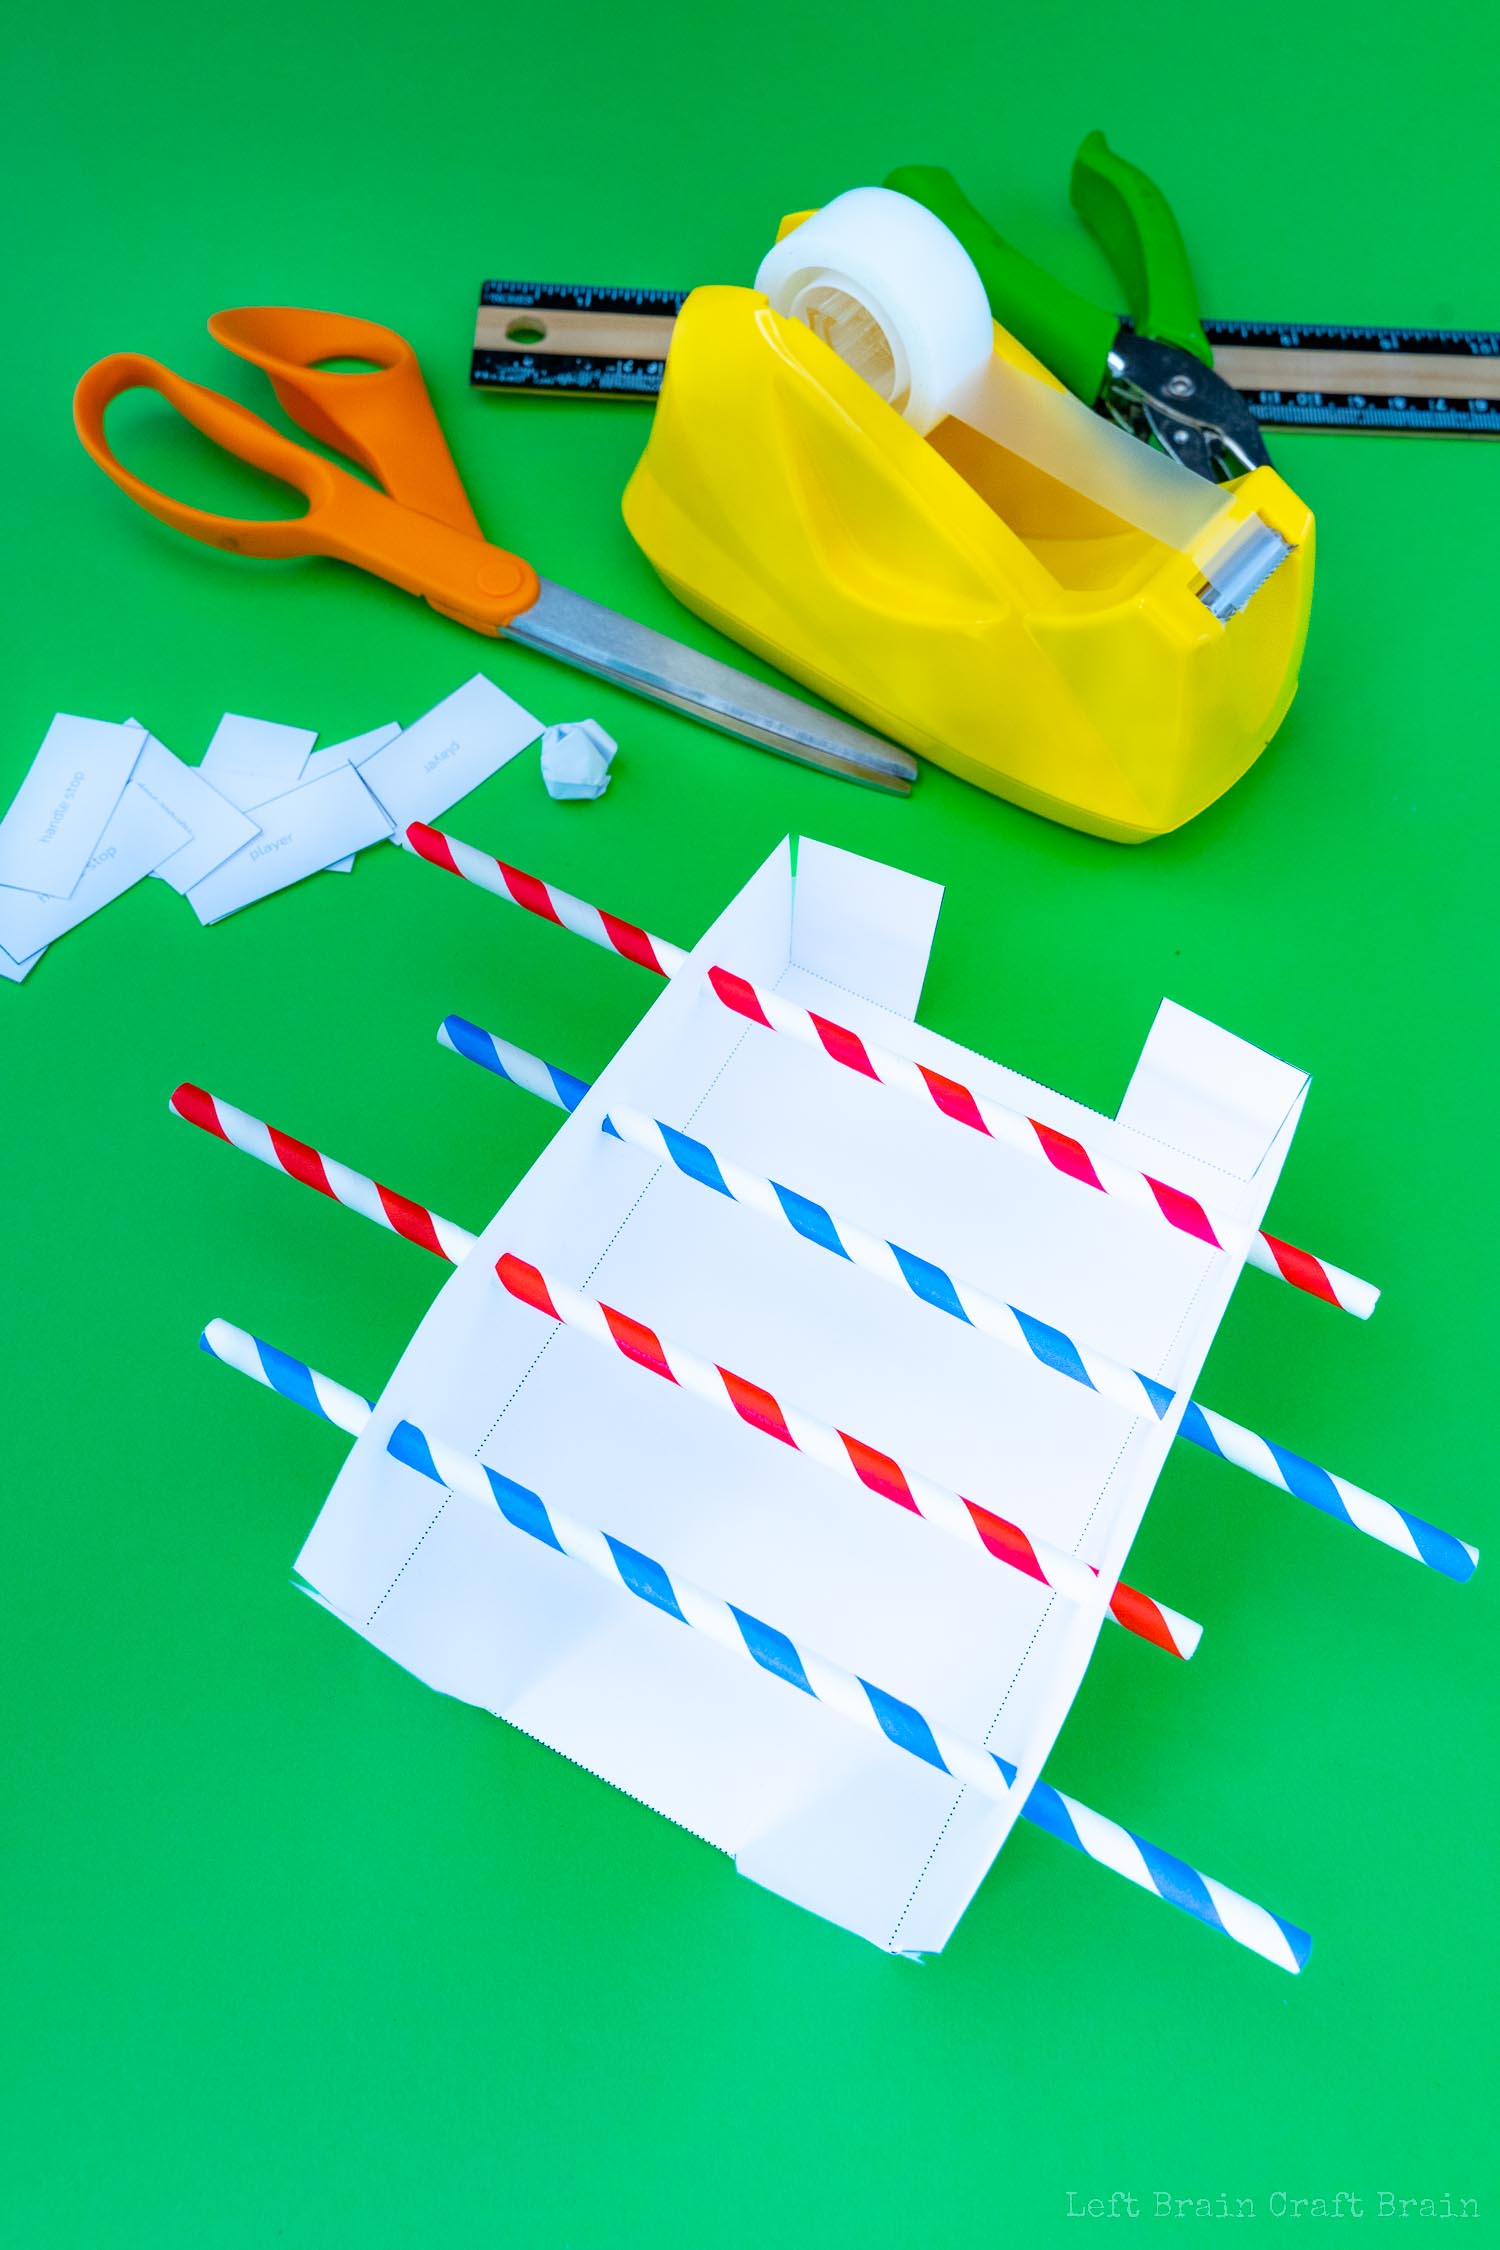 Insert straws through holes in sides of paper foosball template (green hole punch, red and blue striped paper straws, orange-handled scissors, yellow tape dispenser, black and wood ruler, white paper template, crumpled paper ball, small pieces of paper that say handle stop and player on green paper background)